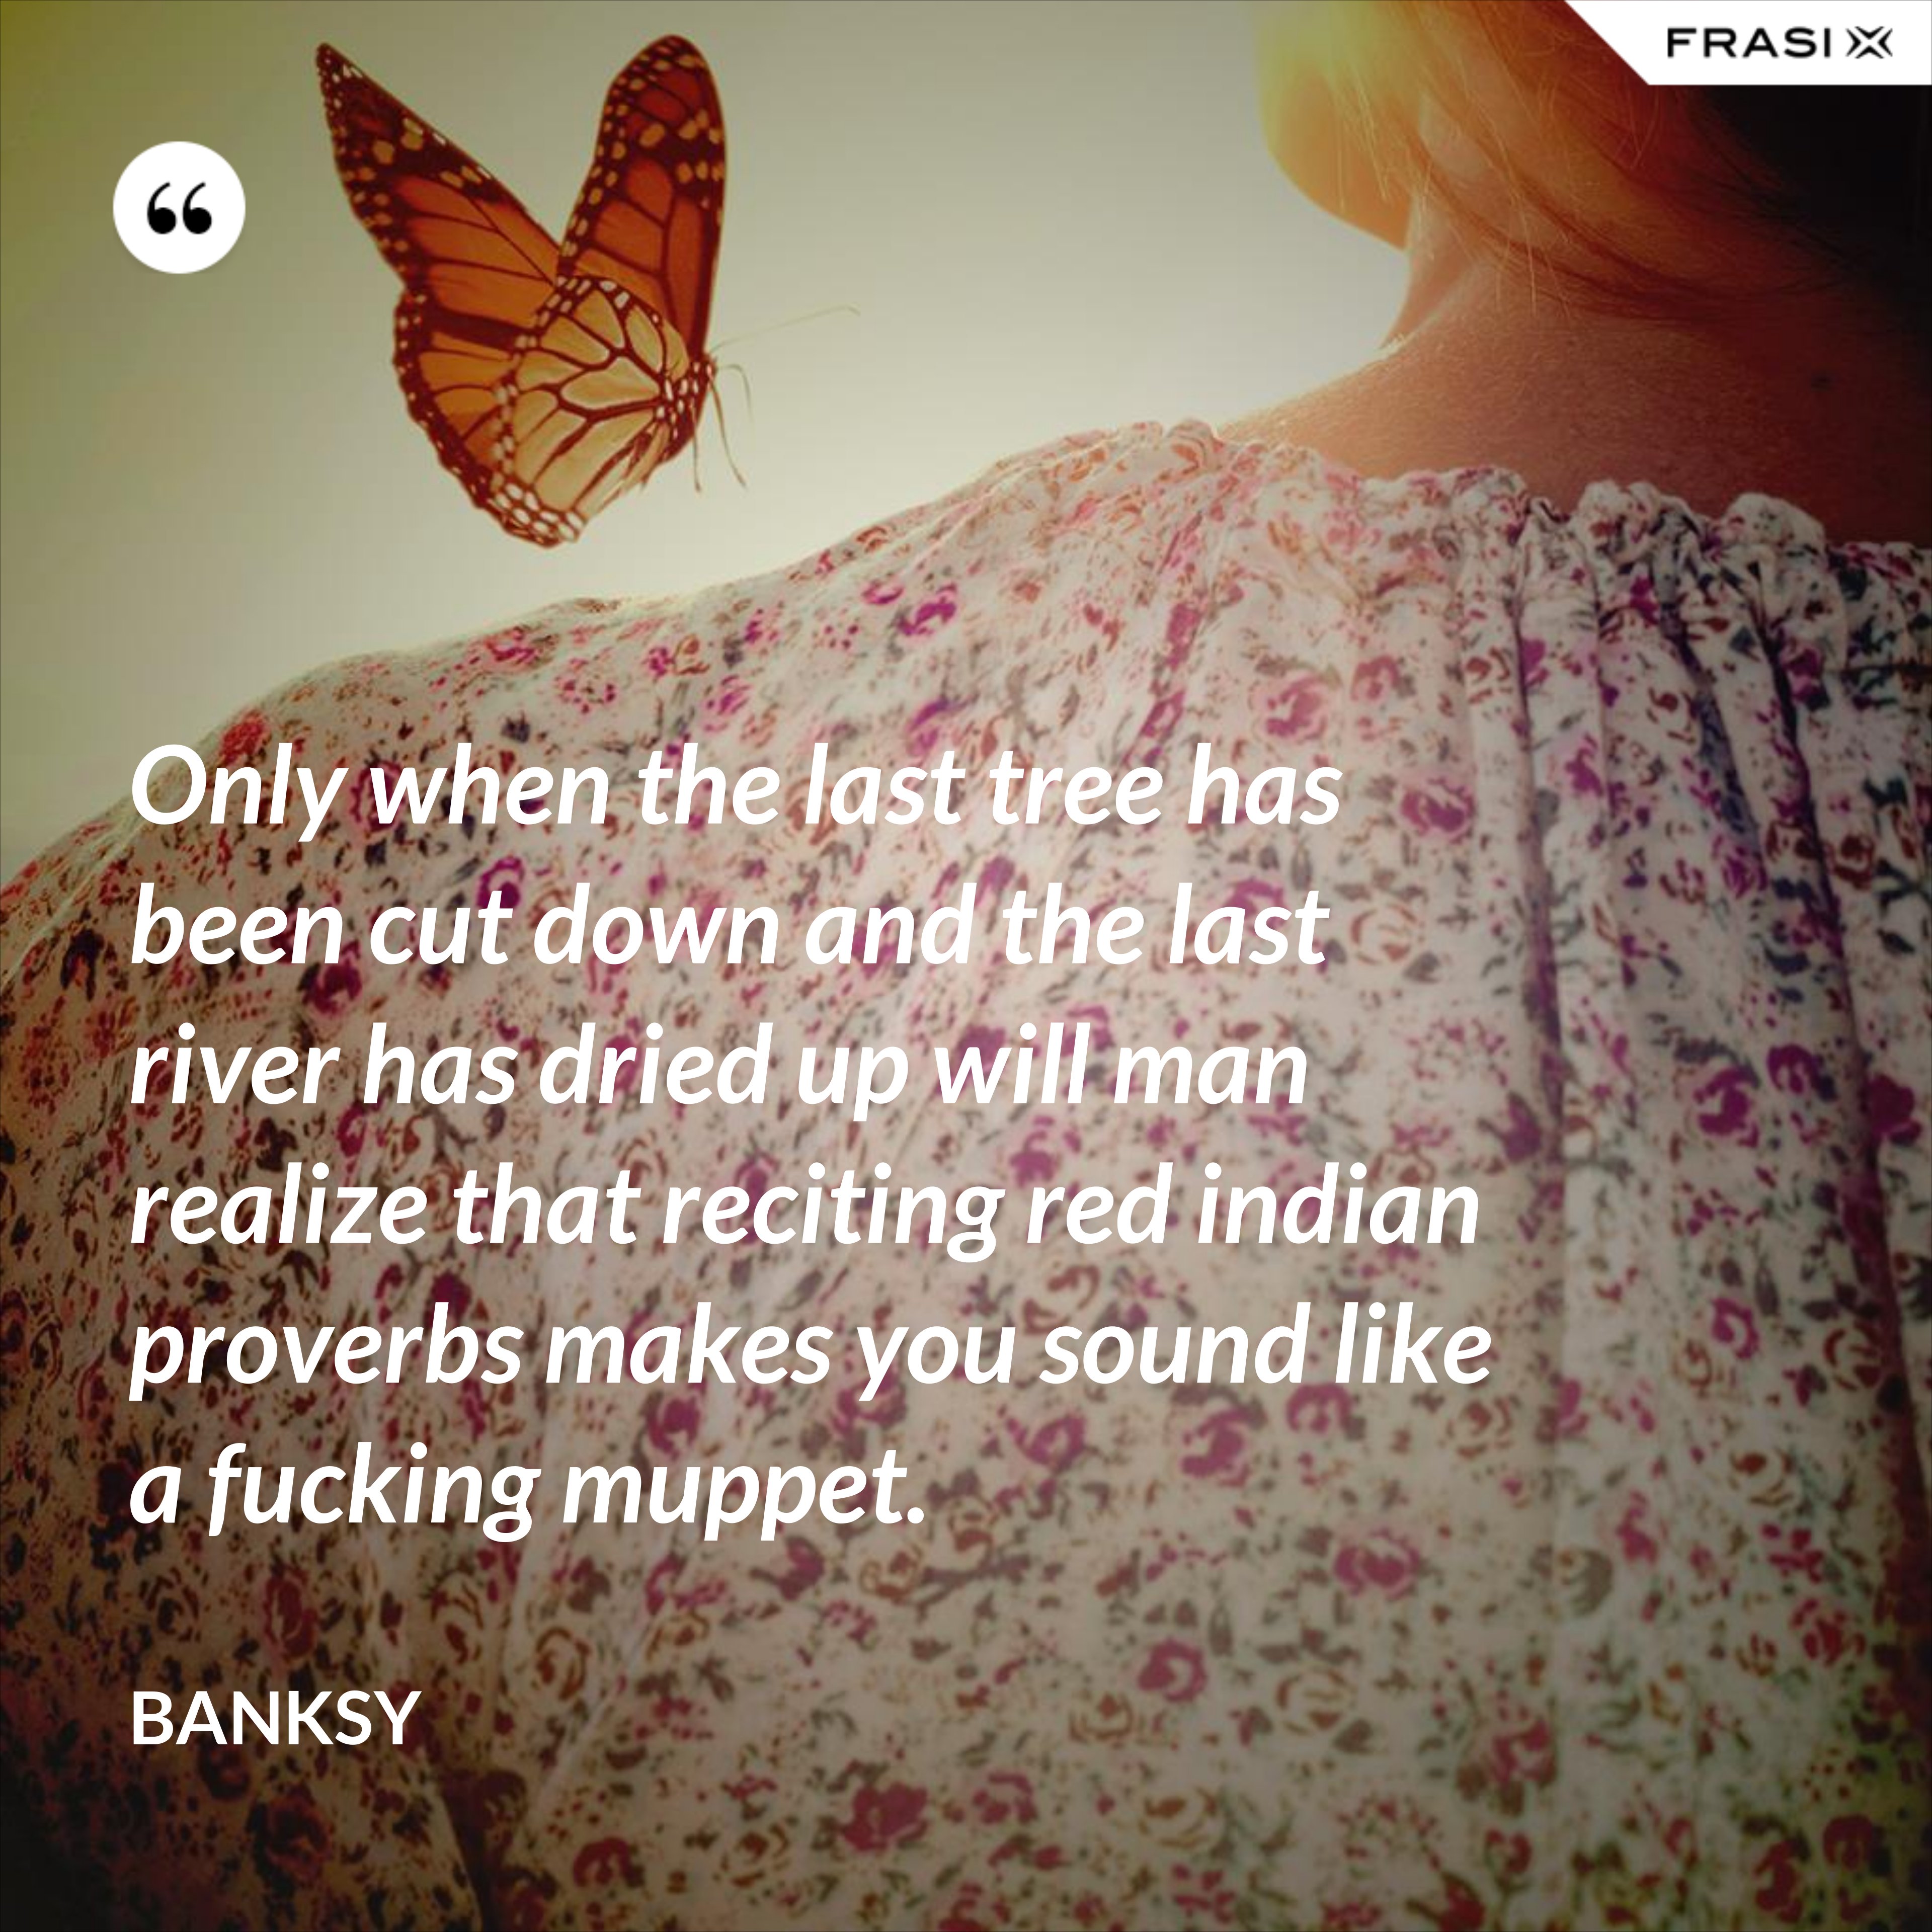 Only when the last tree has been cut down and the last river has dried up will man realize that reciting red indian proverbs makes you sound like a fucking muppet. - Banksy